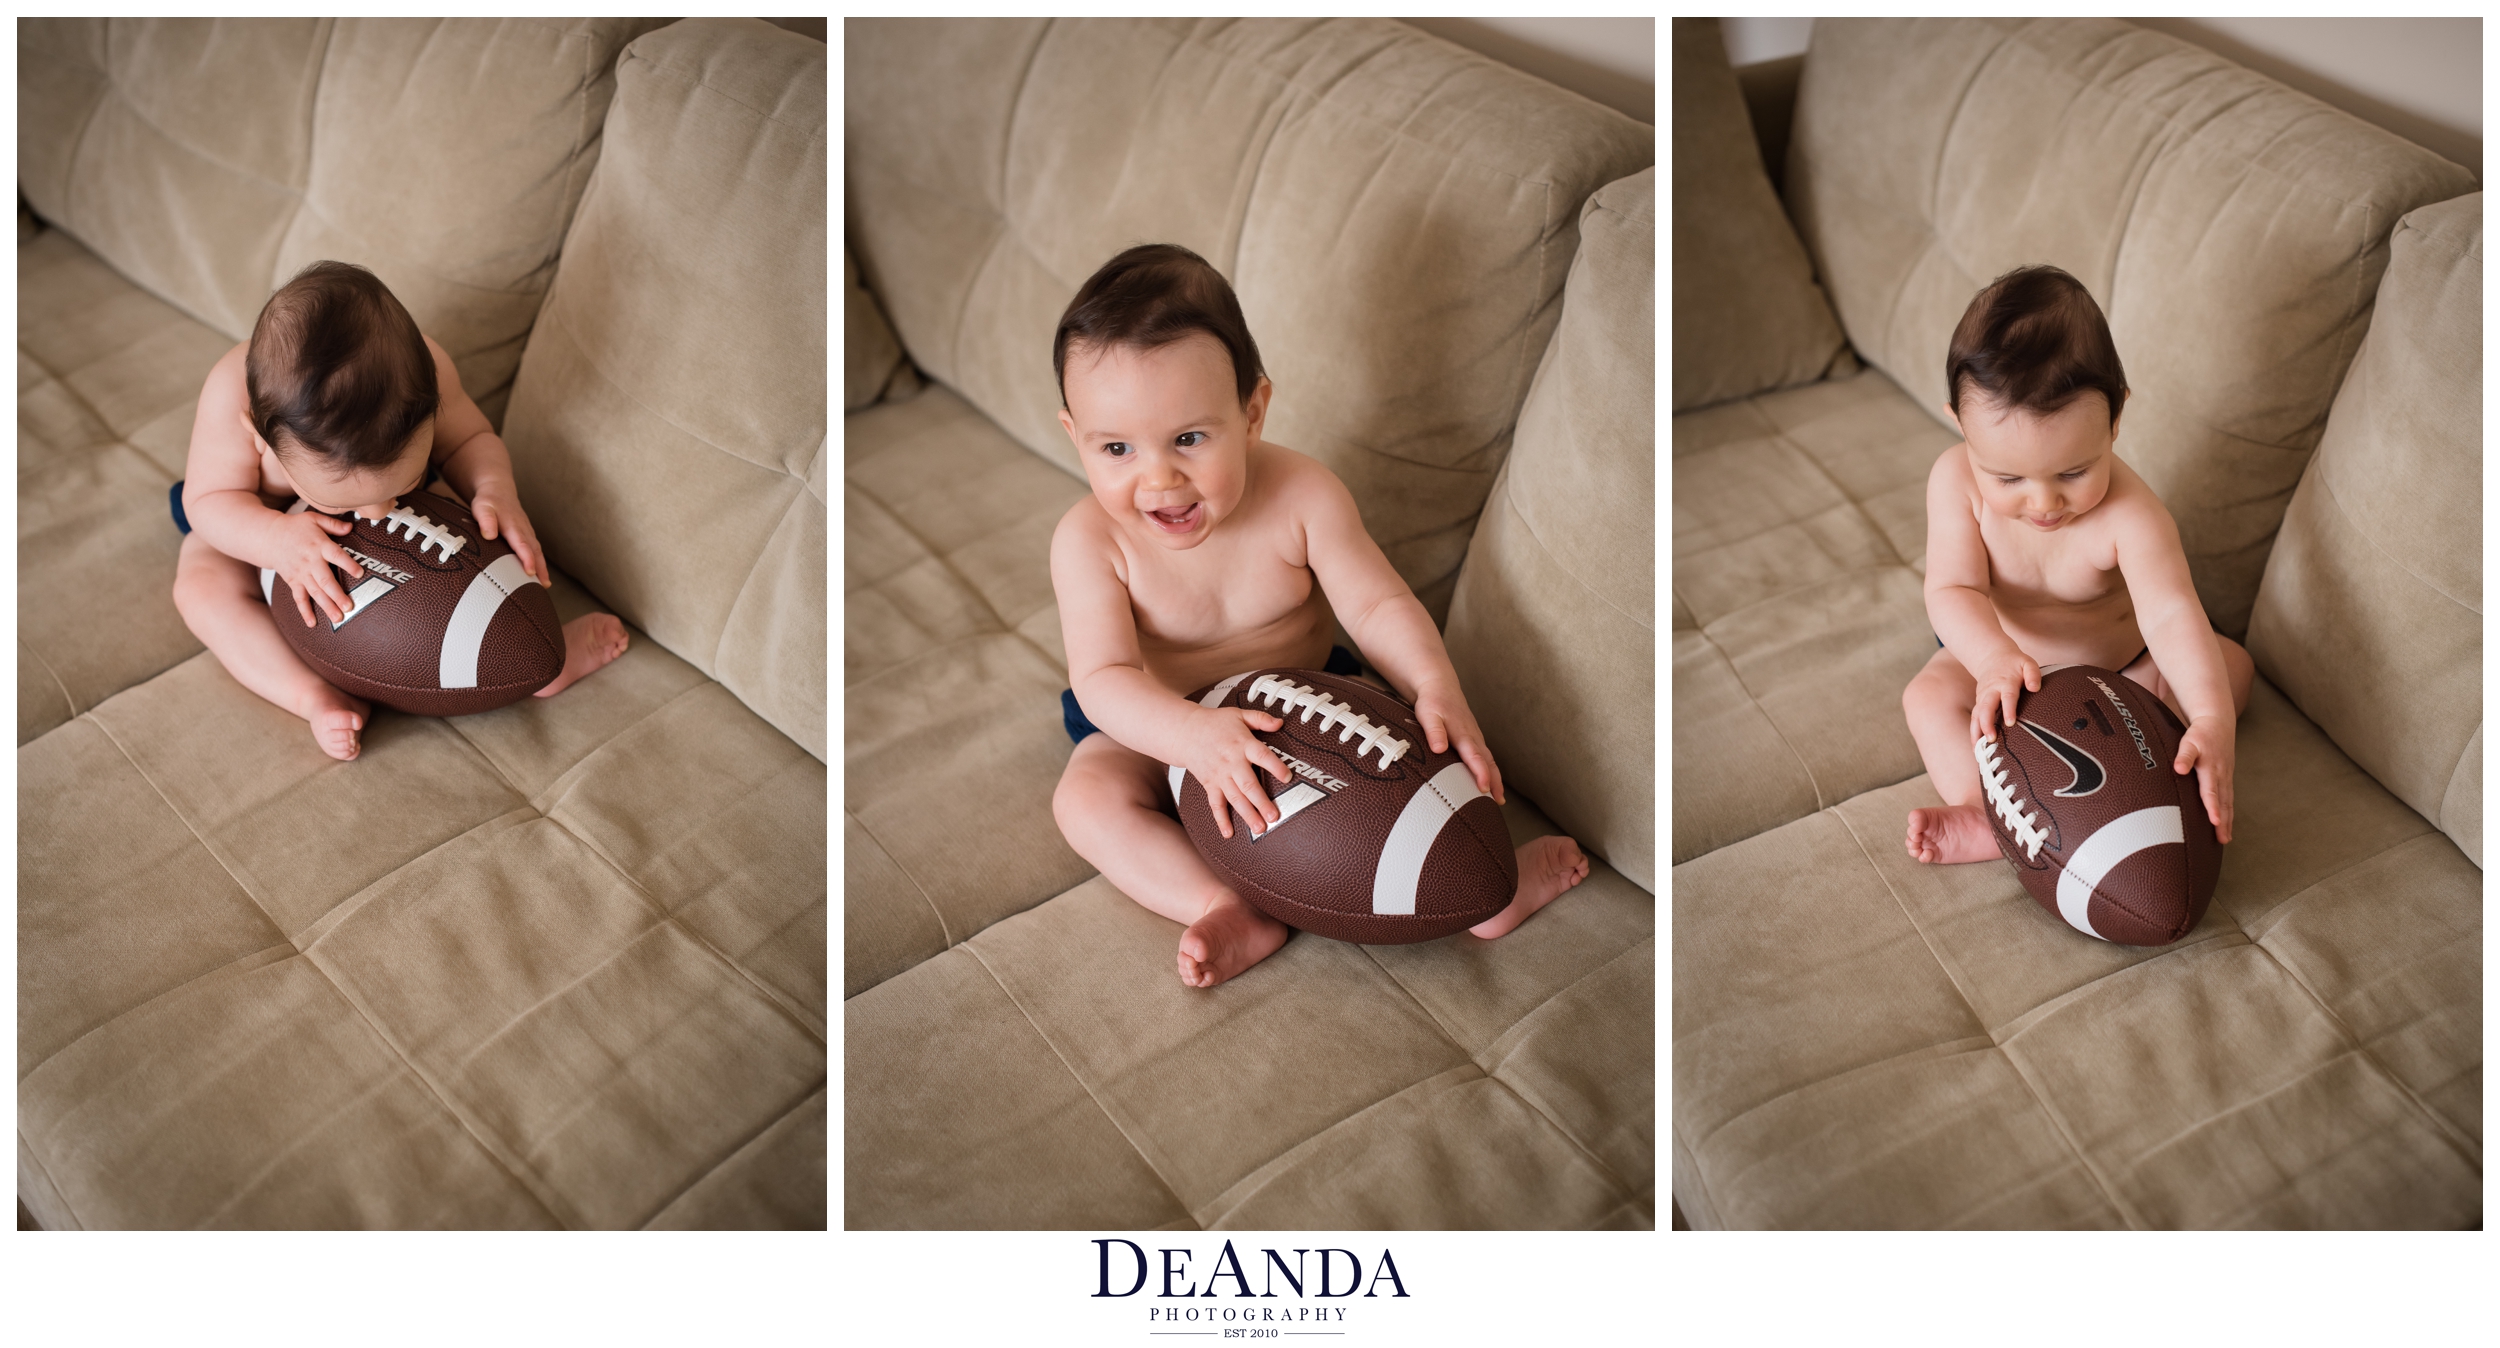 7 month old with football